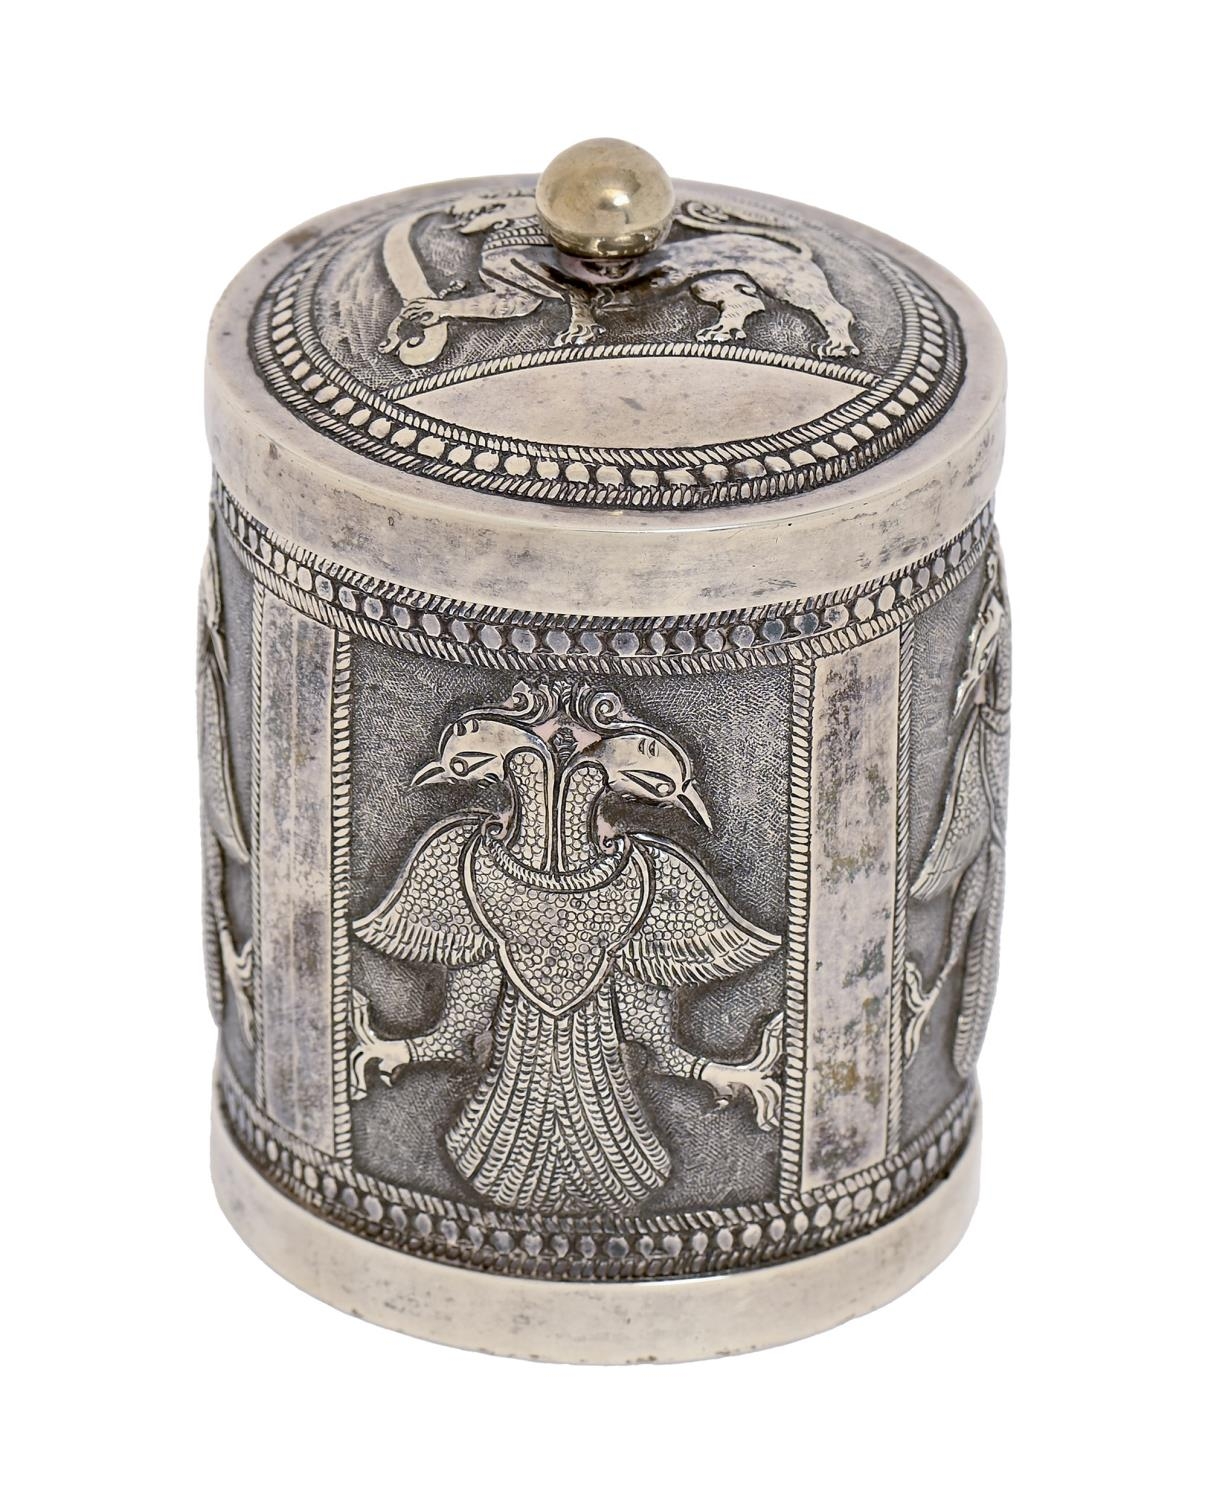 A Burmese silver repousse cigarette canister and cover with detachable base, first half 20th c,